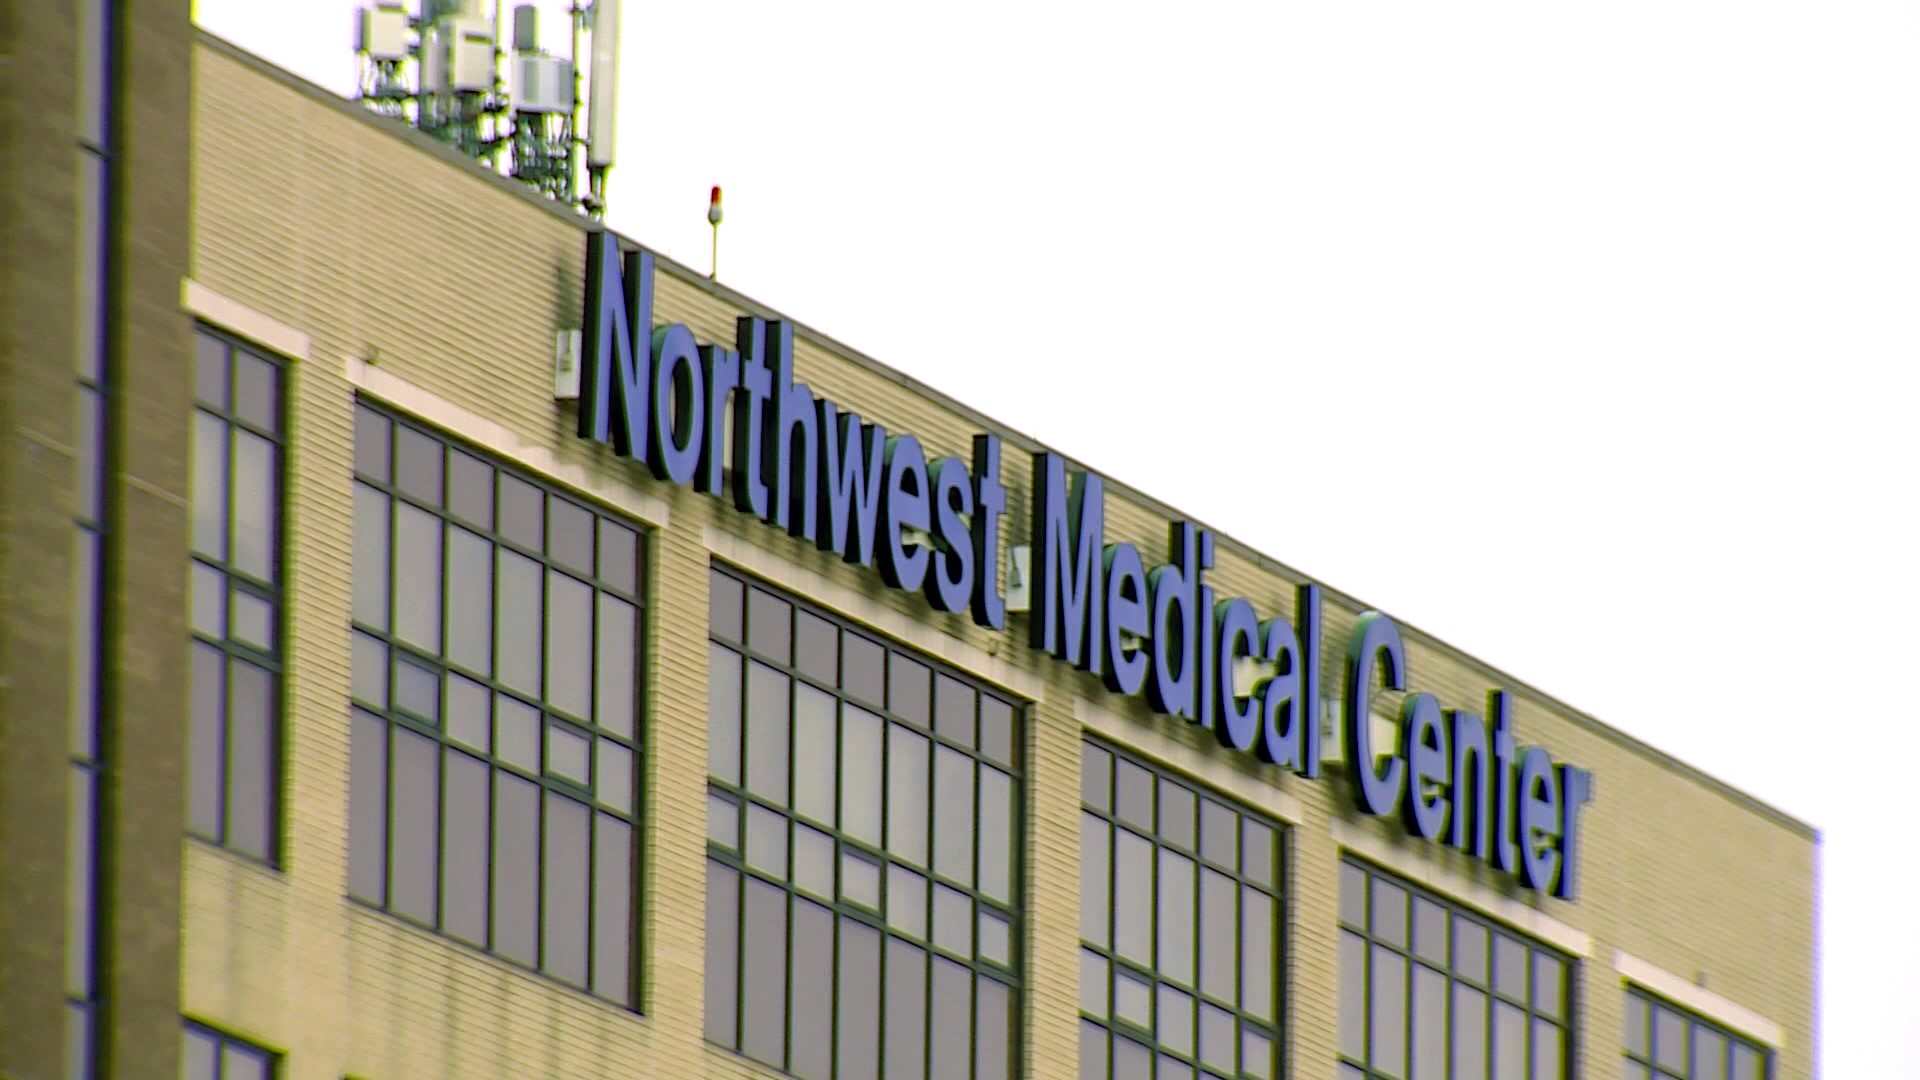 After reaching a settlement with the attorney general's office over payment concerns for 246 Medicaid claims, Northwest Arkansas Hospitals will pay the government.